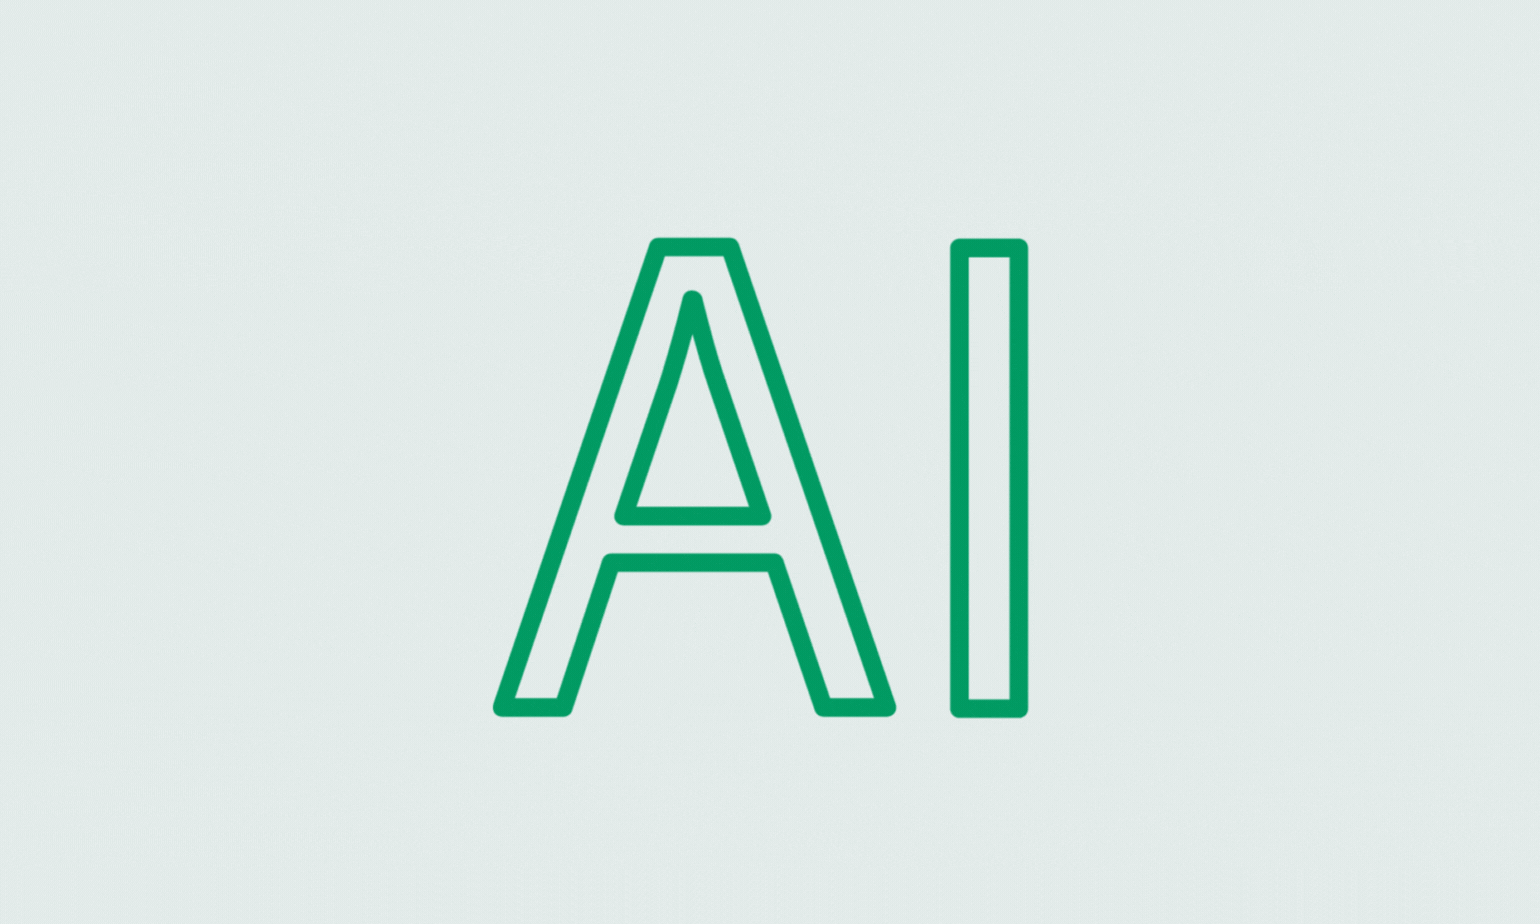 A 2D animation of "AI" text moving bigger and smaller surrounded by circuits